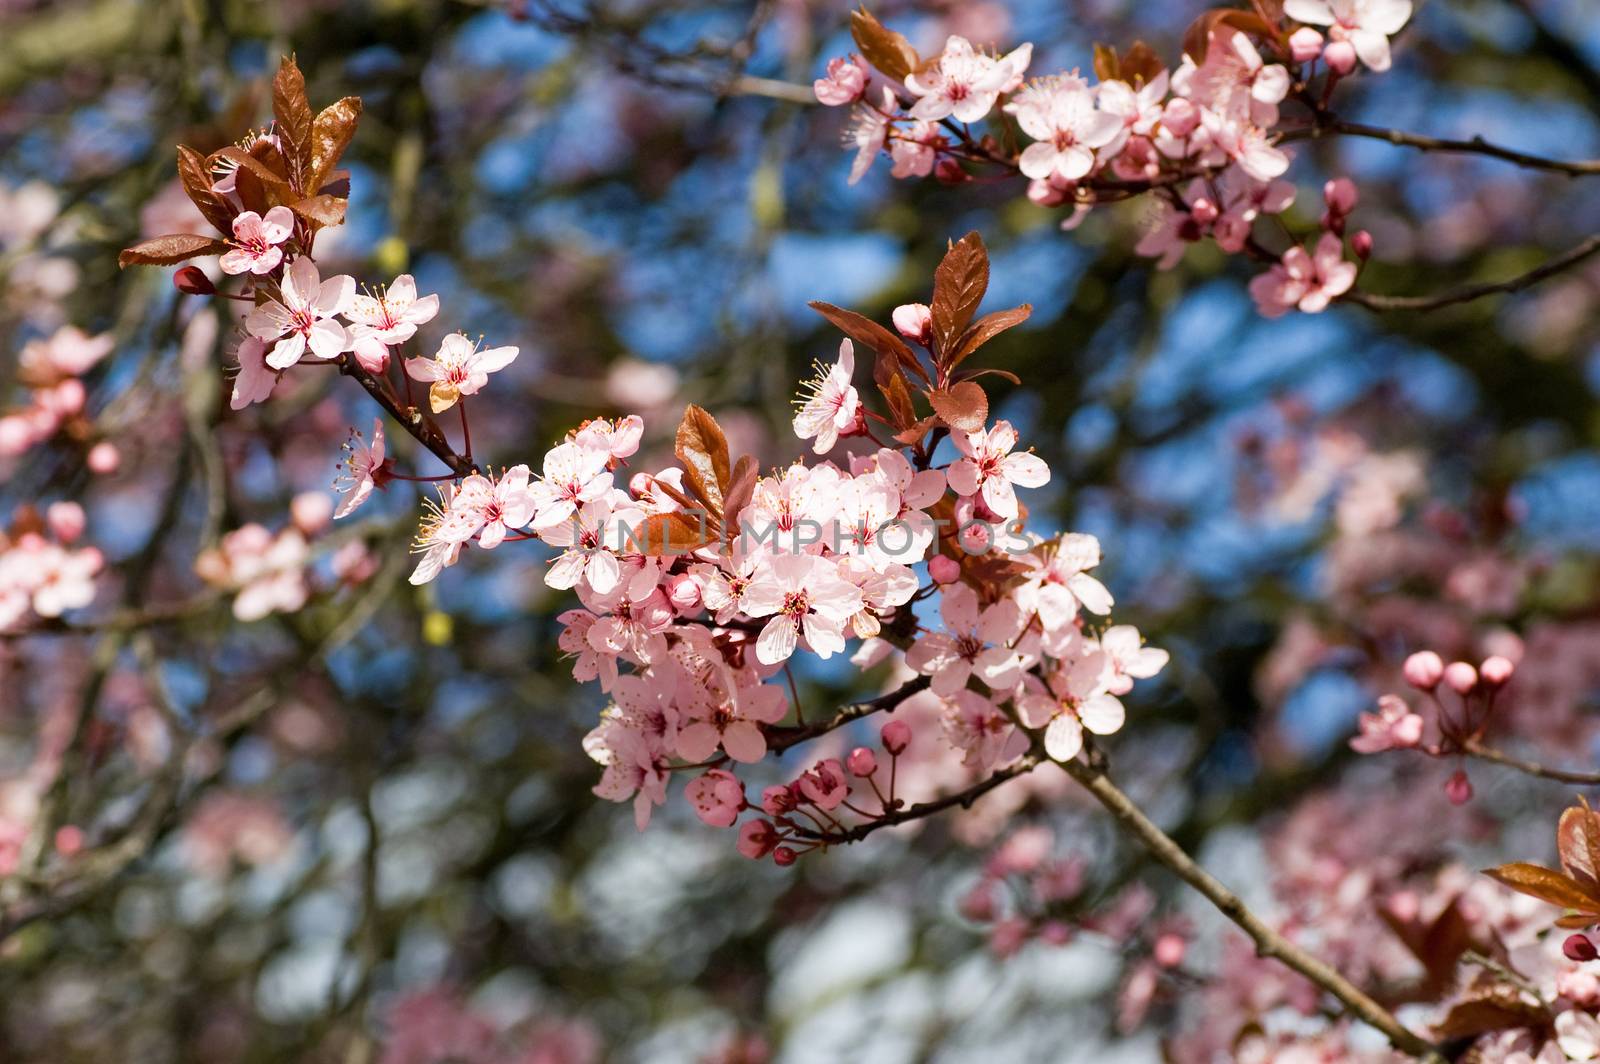 Clusters of cherry blossom by BasPhoto